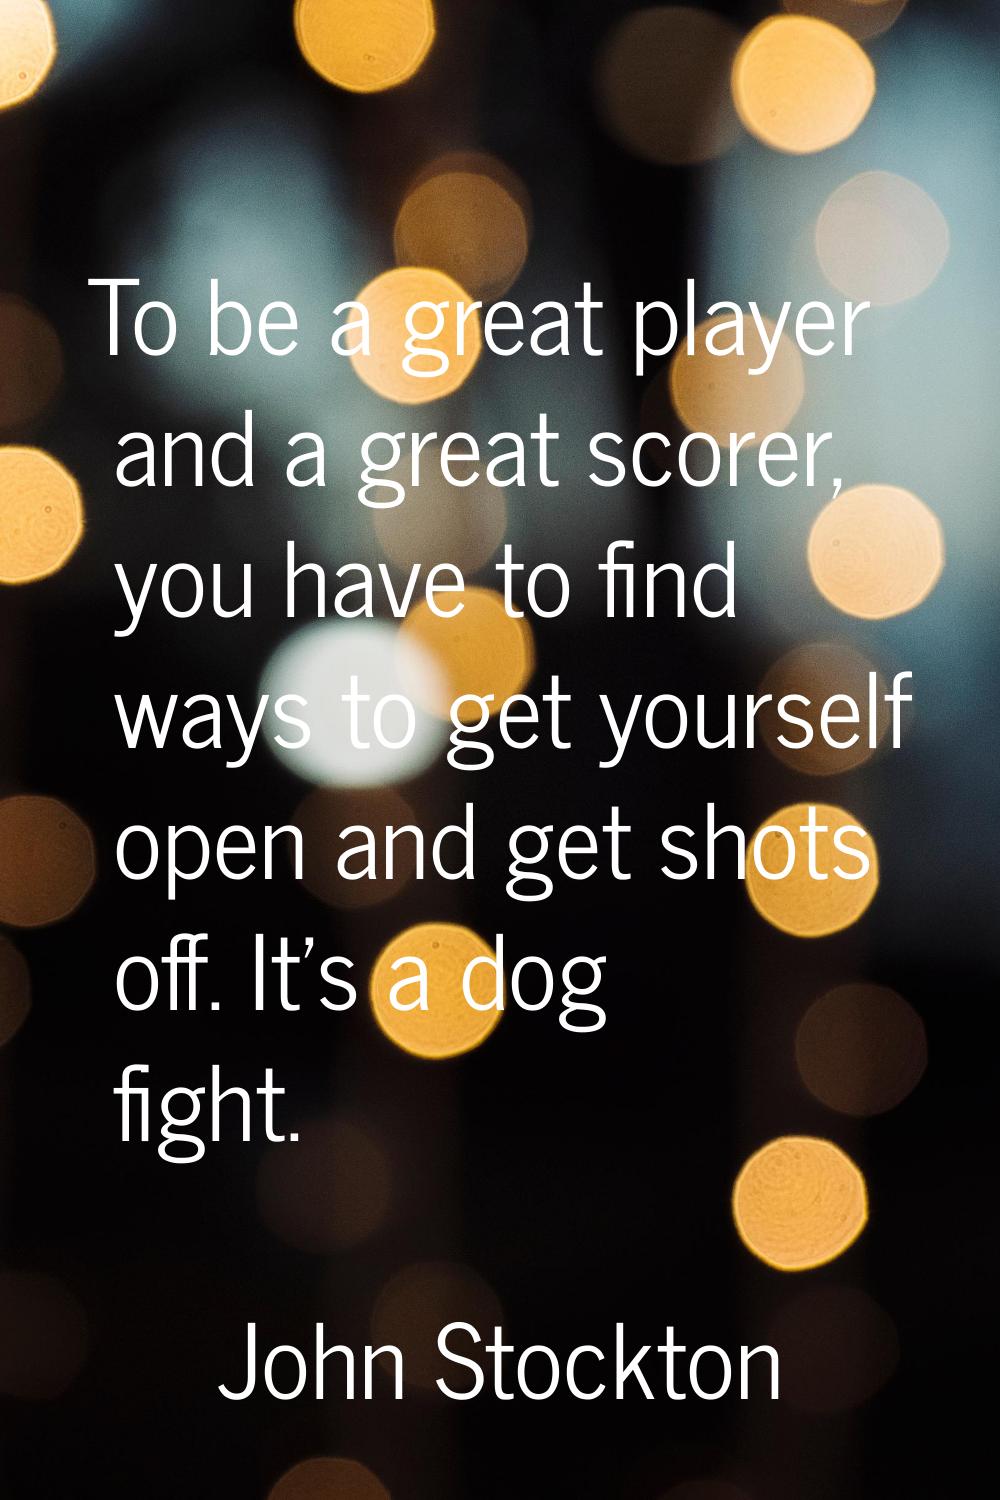 To be a great player and a great scorer, you have to find ways to get yourself open and get shots o